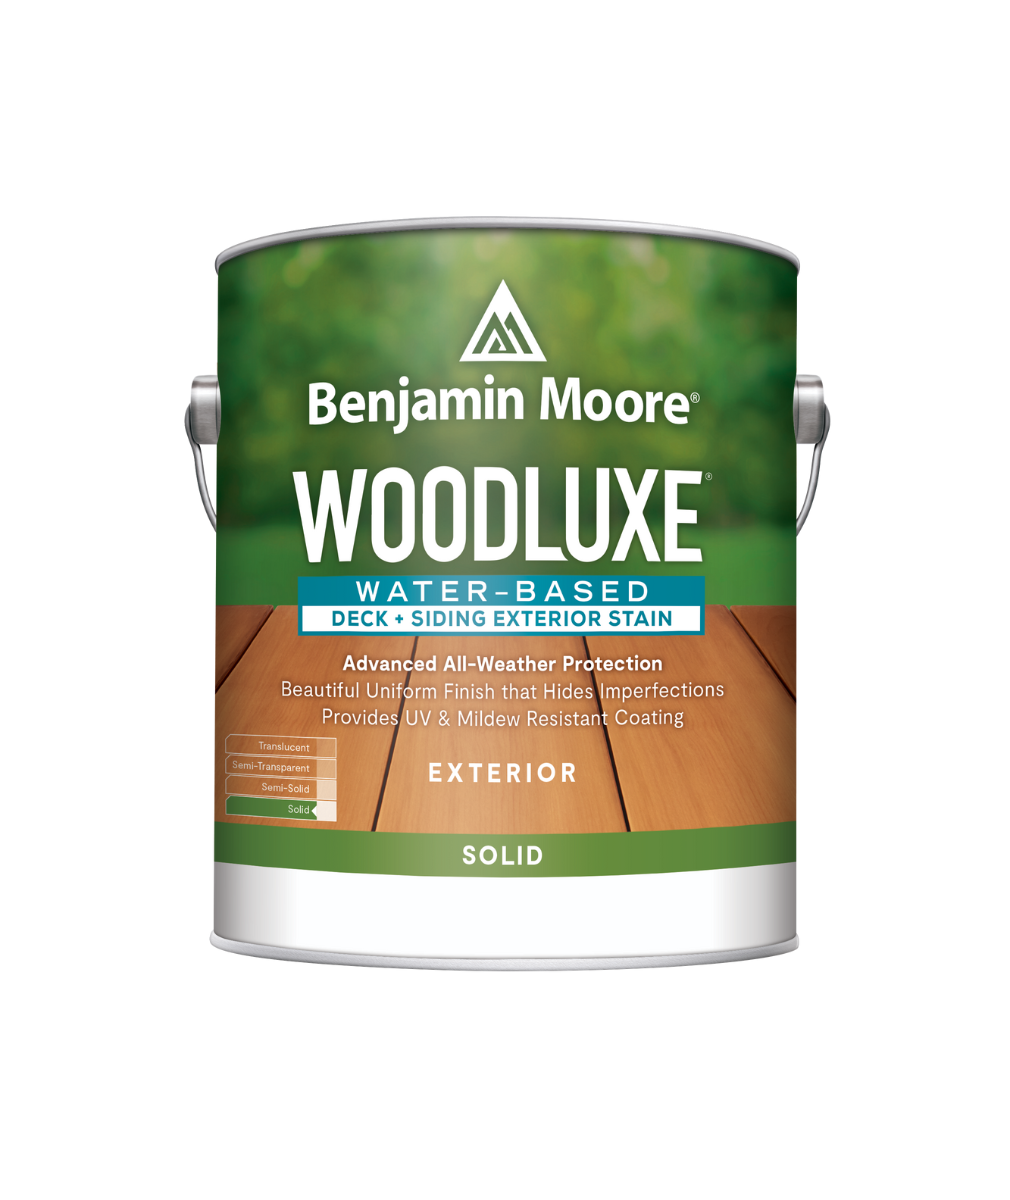 Benjamin Moore Woodluxe® Water-Based Solid Exterior Stain available at Southwestern Paint.